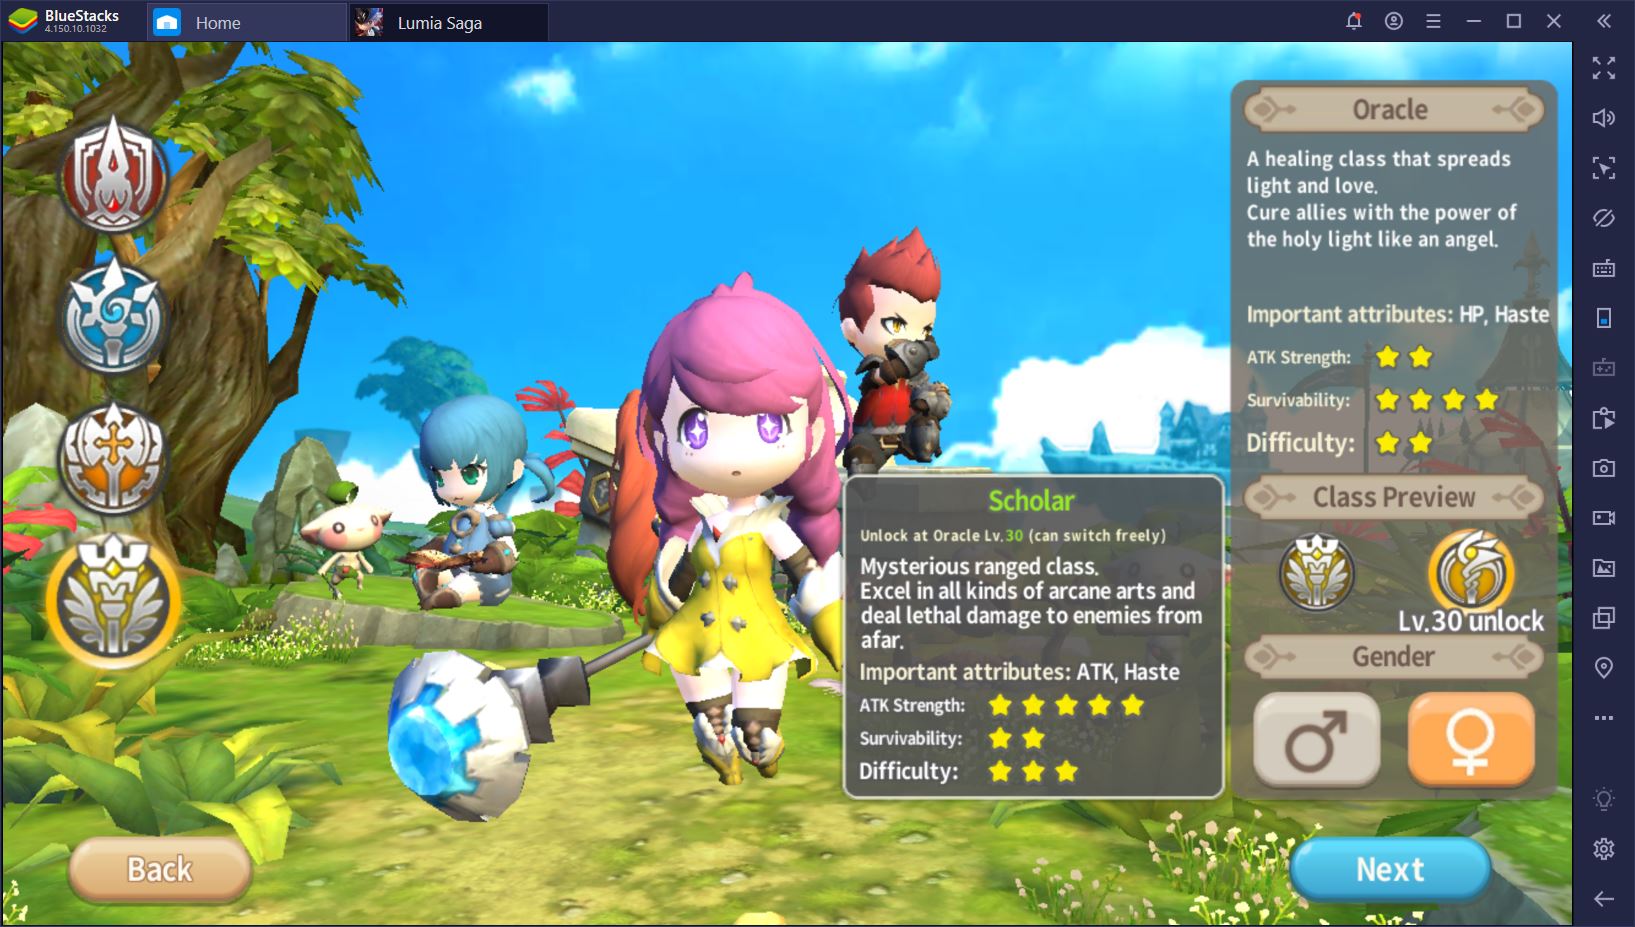 Lumia Saga: The Complete Guide to Classes and Character Development